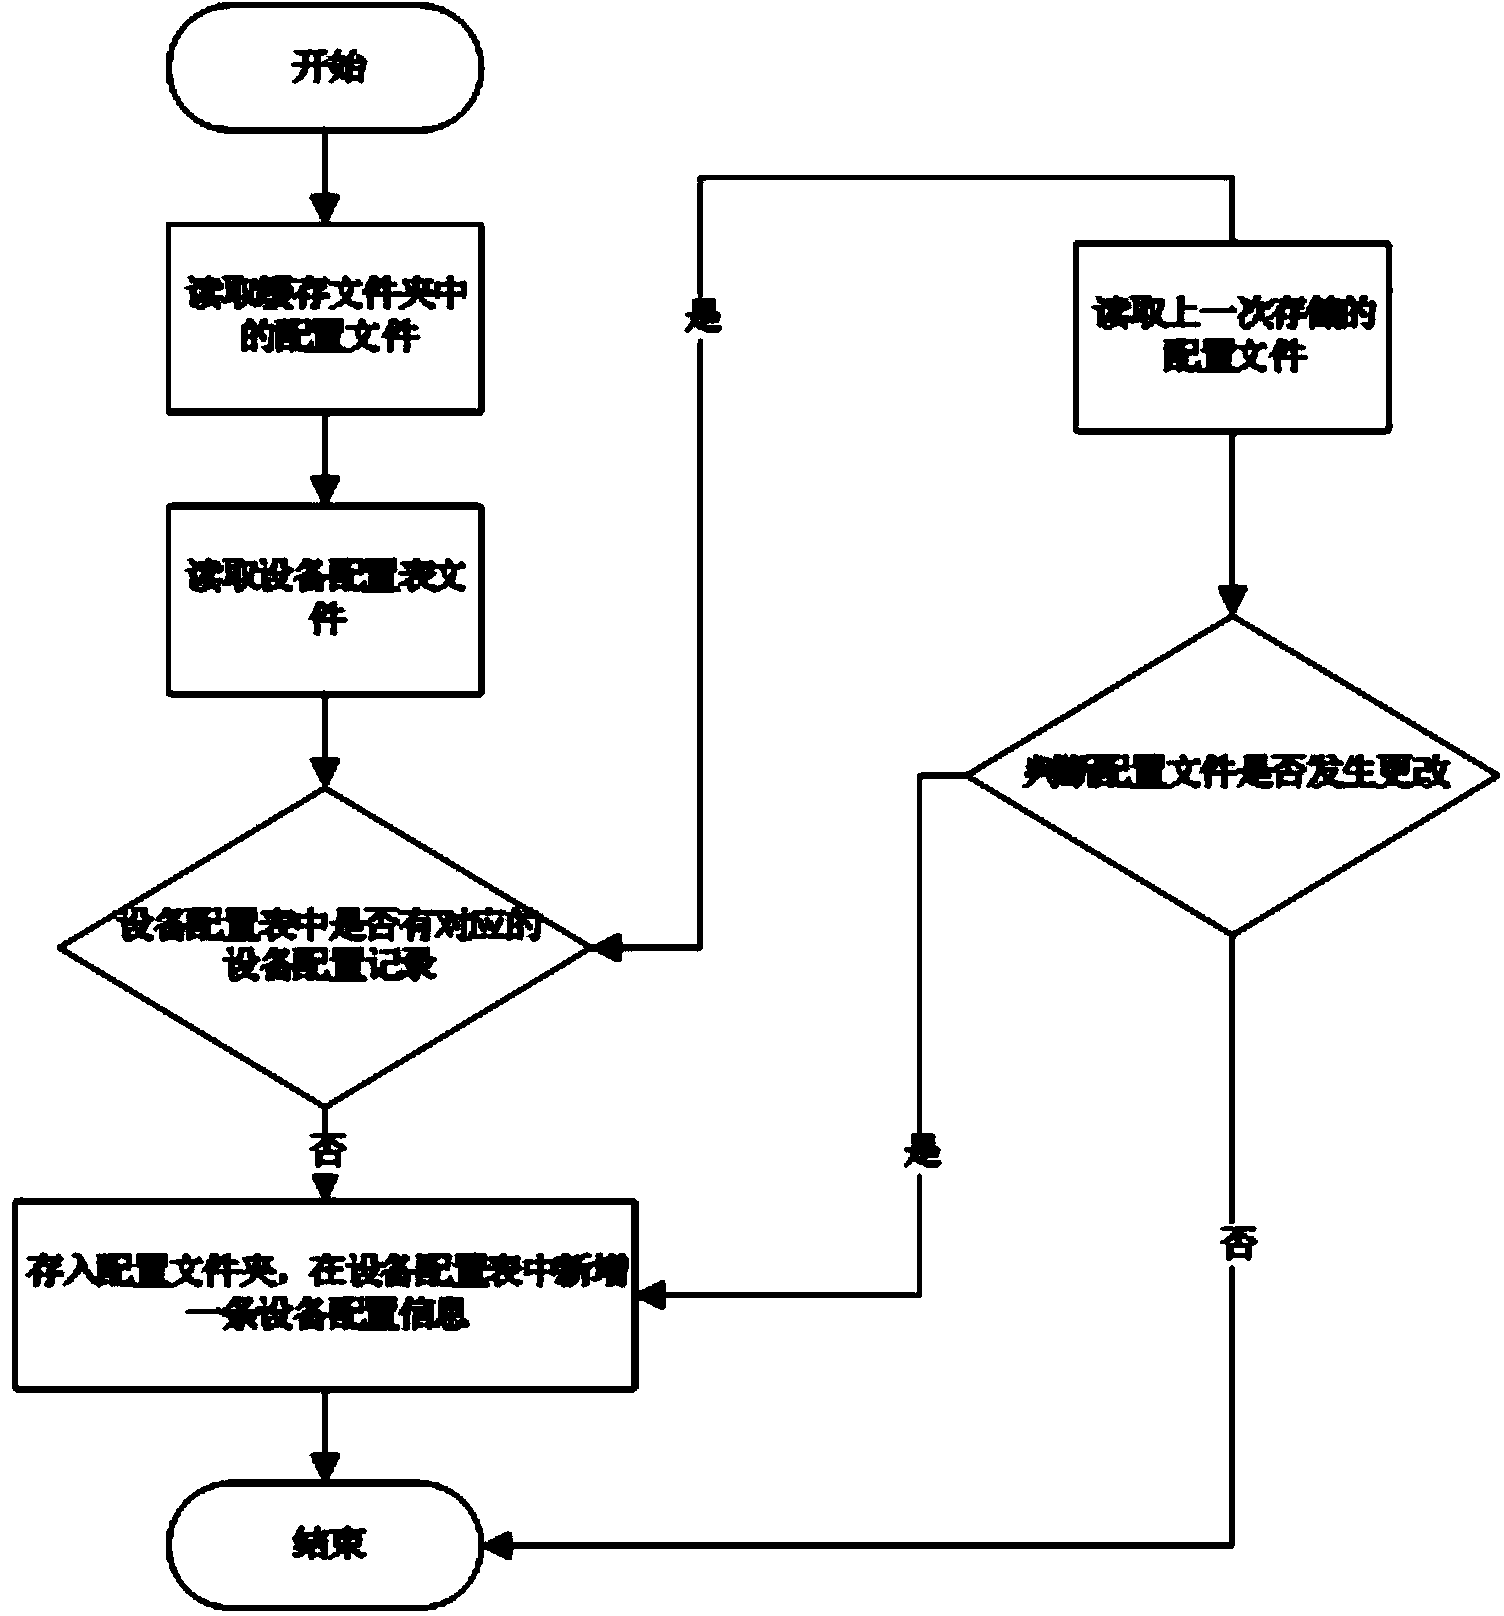 System and method for acquiring, analyzing and releasing power network equipment logs and configuration files